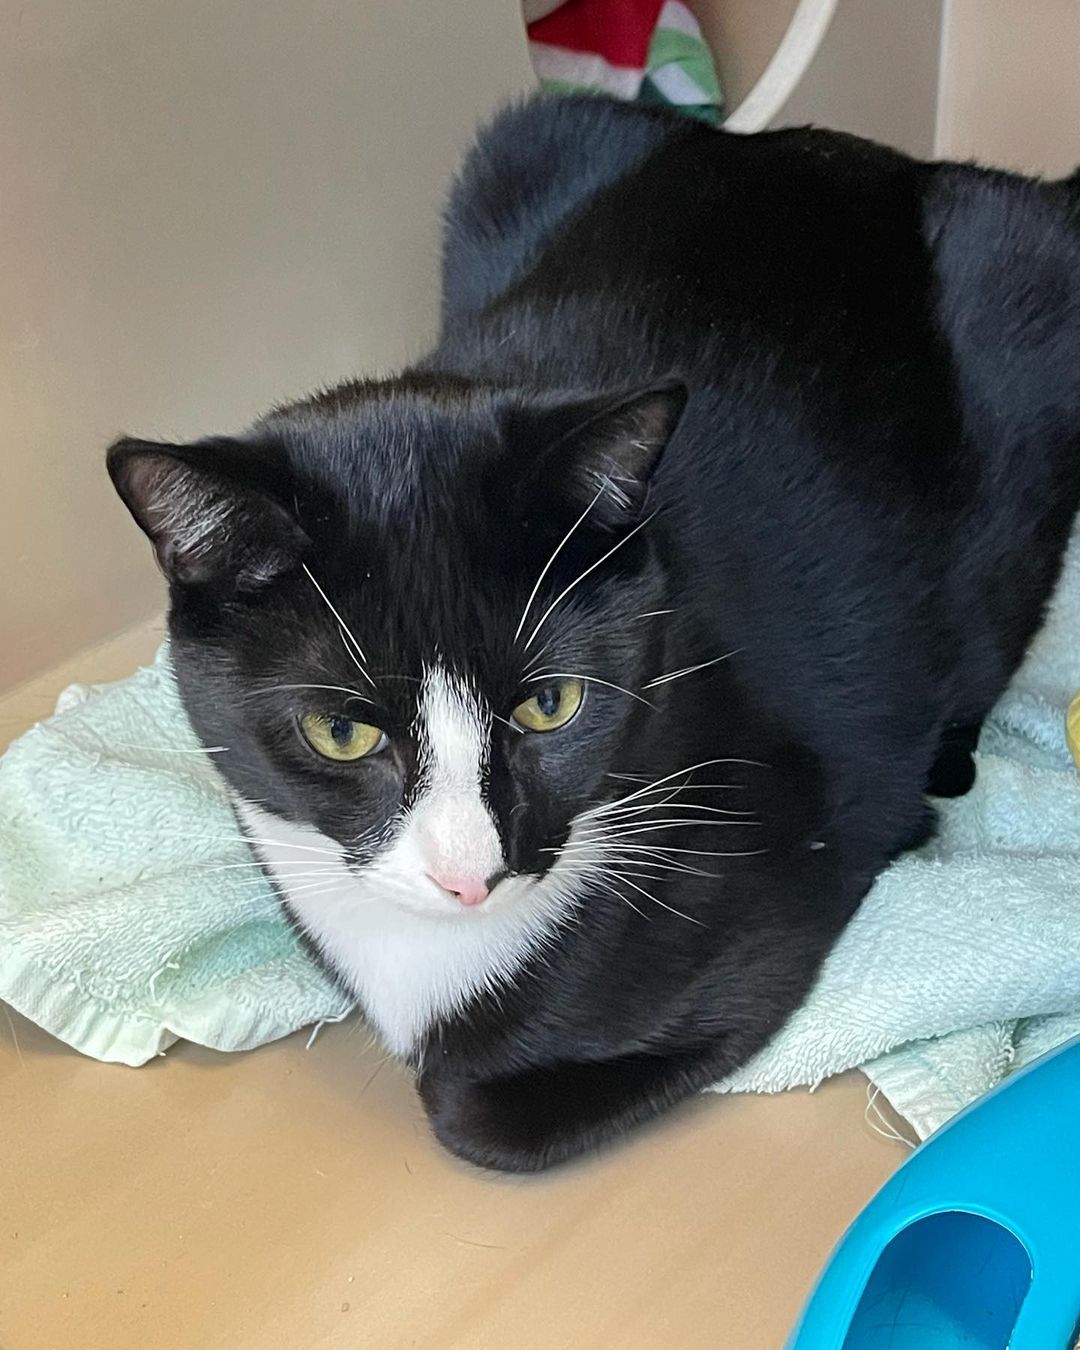 You need to stop what you are doing and go meet Tom and Jerry at Petco in Poulsbo. They are the cutest tuxedos. They are both playful and sweet as can be. 
Go to Petango.com or email: catadopt@pawsbink.org to inquire about adoptions. 
.
.
.
.
<a target='_blank' href='https://www.instagram.com/explore/tags/adoptdontshop/'>#adoptdontshop</a> <a target='_blank' href='https://www.instagram.com/explore/tags/petcolovepartner/'>#petcolovepartner</a> <a target='_blank' href='https://www.instagram.com/explore/tags/pawsbink/'>#pawsbink</a> <a target='_blank' href='https://www.instagram.com/explore/tags/adoptdontshop/'>#adoptdontshop</a> <a target='_blank' href='https://www.instagram.com/explore/tags/adoptacat/'>#adoptacat</a> <a target='_blank' href='https://www.instagram.com/explore/tags/tuxedocat/'>#tuxedocat</a> <a target='_blank' href='https://www.instagram.com/explore/tags/blackandwhitetuxedocat/'>#blackandwhitetuxedocat</a> <a target='_blank' href='https://www.instagram.com/explore/tags/tuxedocatsofinstagram/'>#tuxedocatsofinstagram</a> <a target='_blank' href='https://www.instagram.com/explore/tags/northkitsap/'>#northkitsap</a> <a target='_blank' href='https://www.instagram.com/explore/tags/poulsbowashington/'>#poulsbowashington</a> <a target='_blank' href='https://www.instagram.com/explore/tags/kingstonwashington/'>#kingstonwashington</a> <a target='_blank' href='https://www.instagram.com/explore/tags/bainbridgeisland/'>#bainbridgeisland</a>